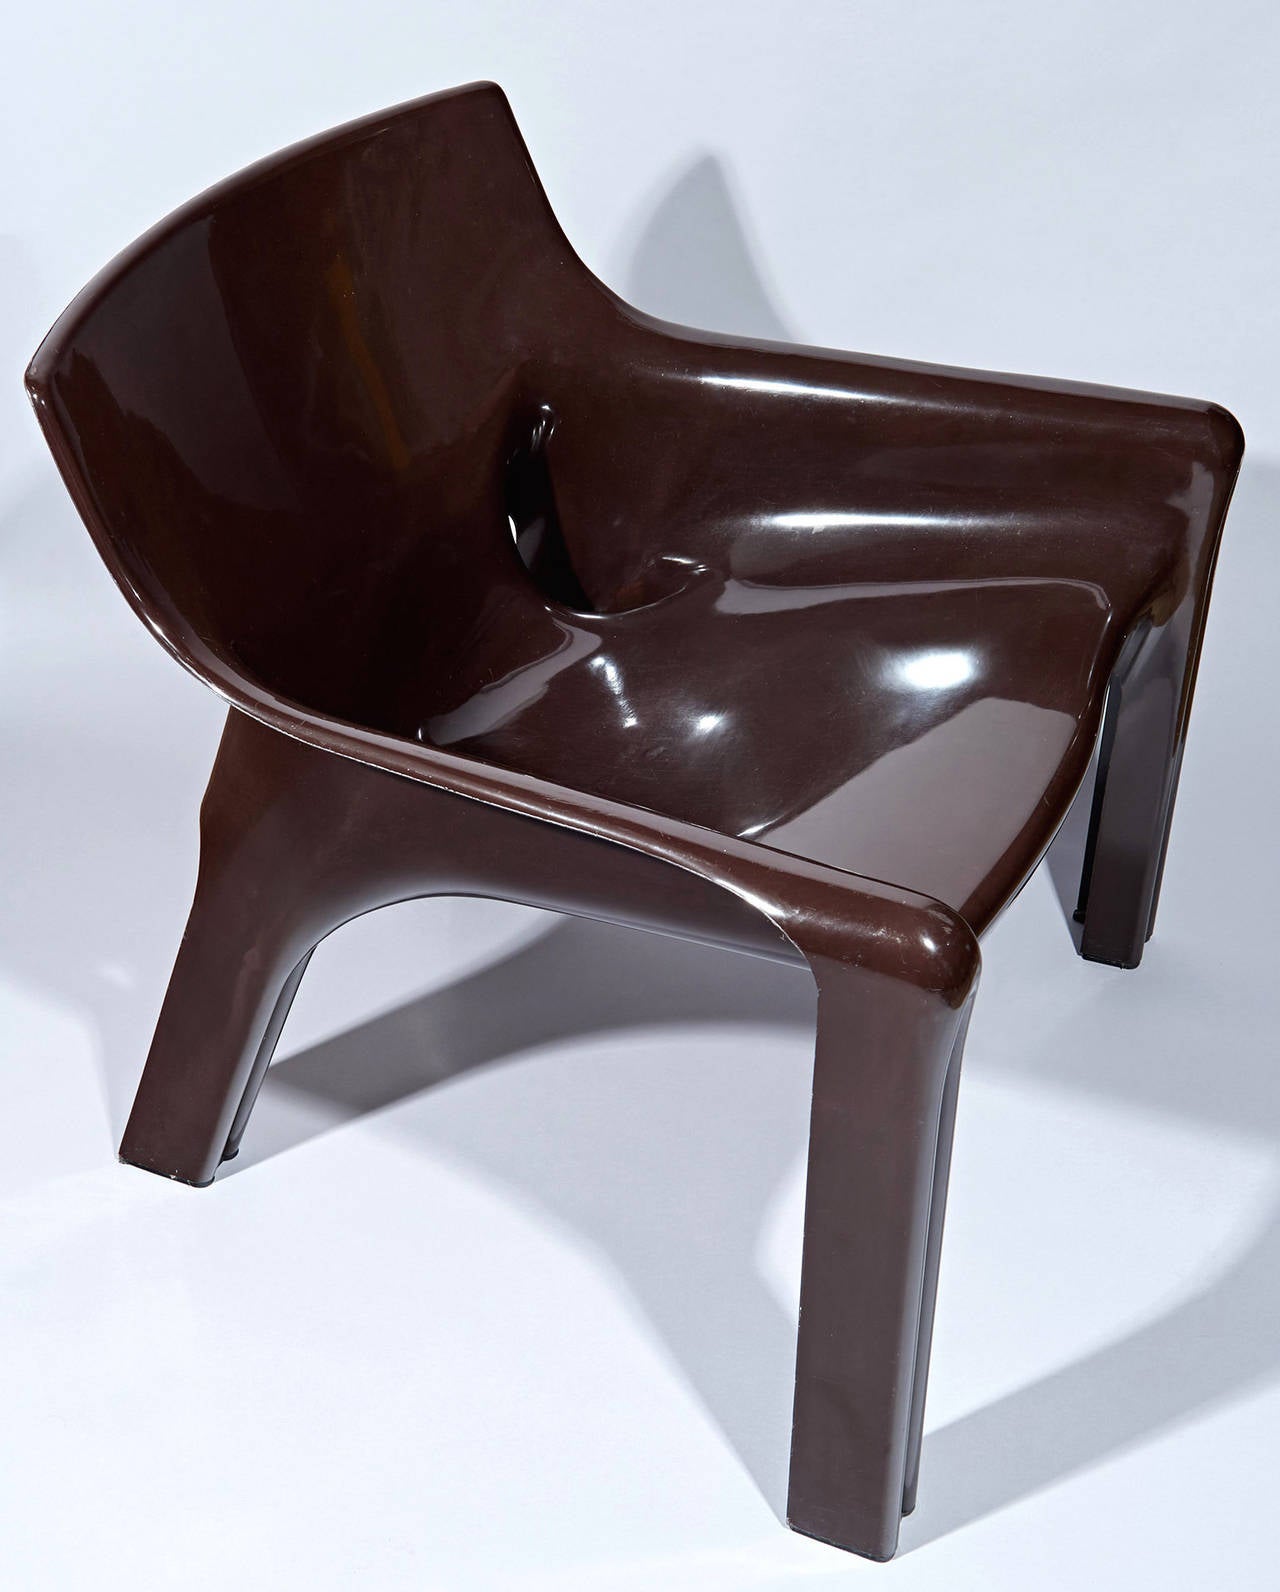 One of the Holy Grails of modernism was a chair formed from a single piece of material. Such a chair would be structurally unified, and also inexpensive to mass-produce. Many of the pioneering architects of the last century experimented with this